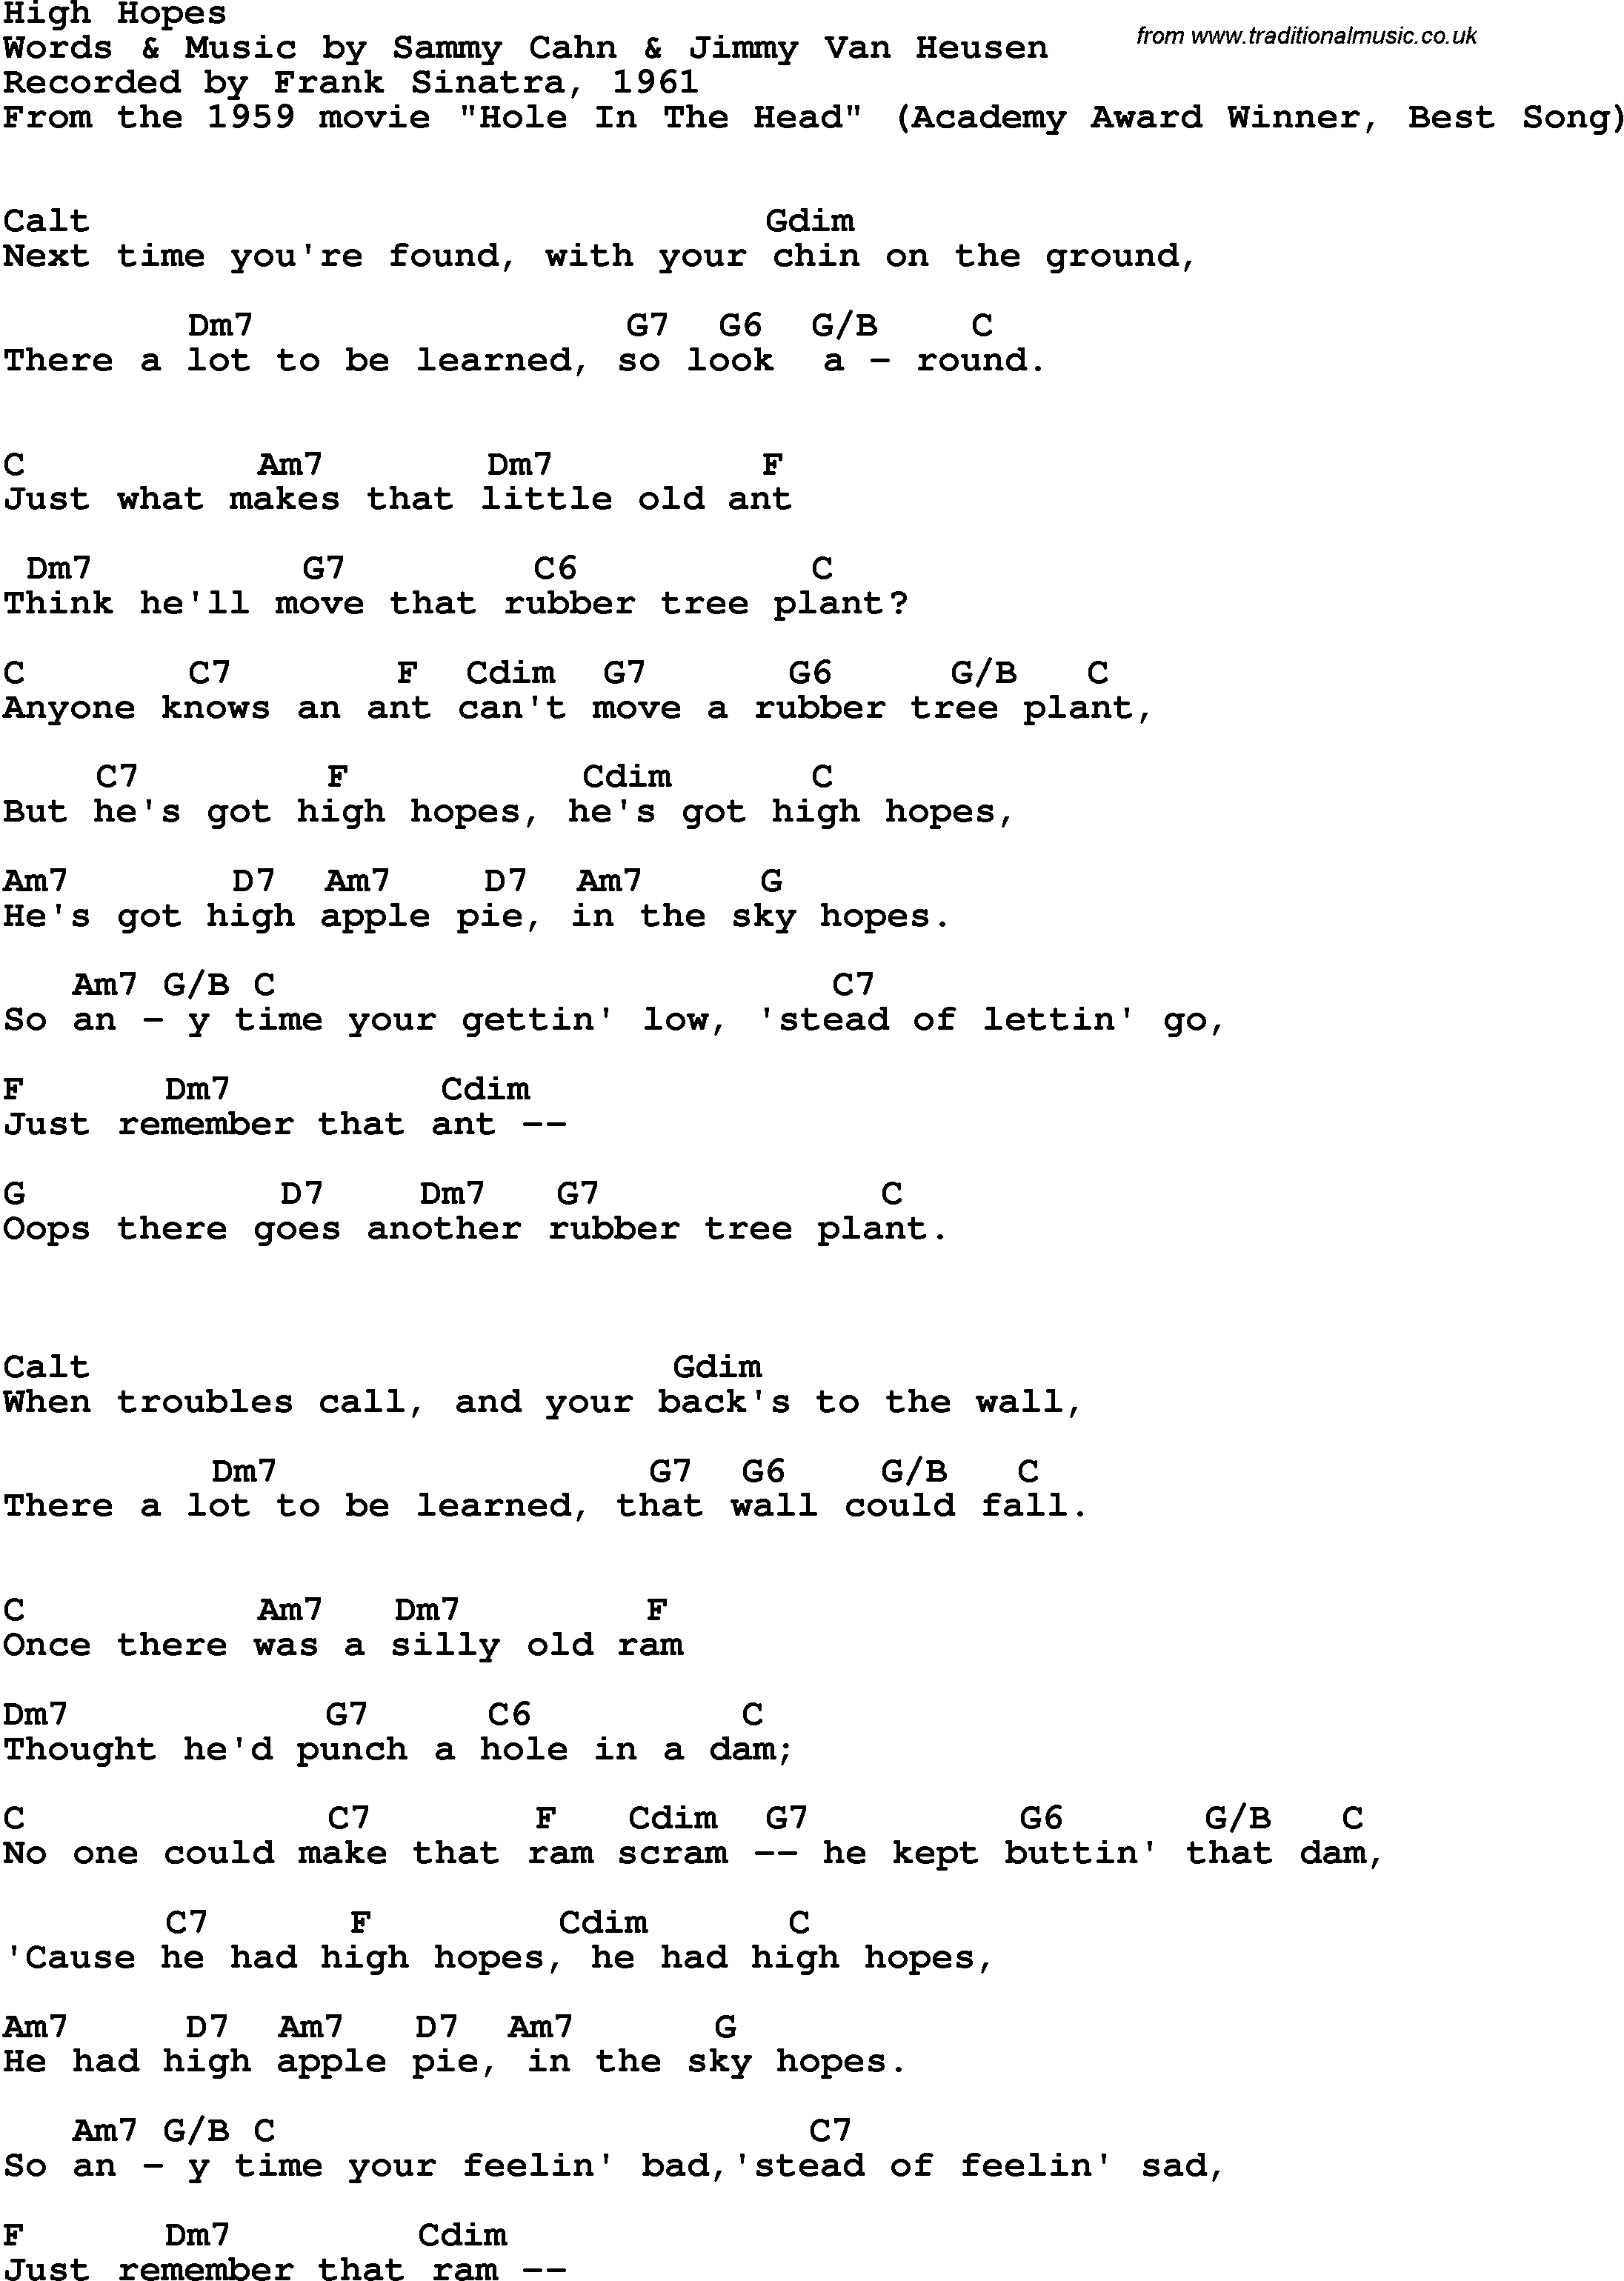 Song Lyrics with guitar chords for High Hopes - Frank Sinatra, 1961